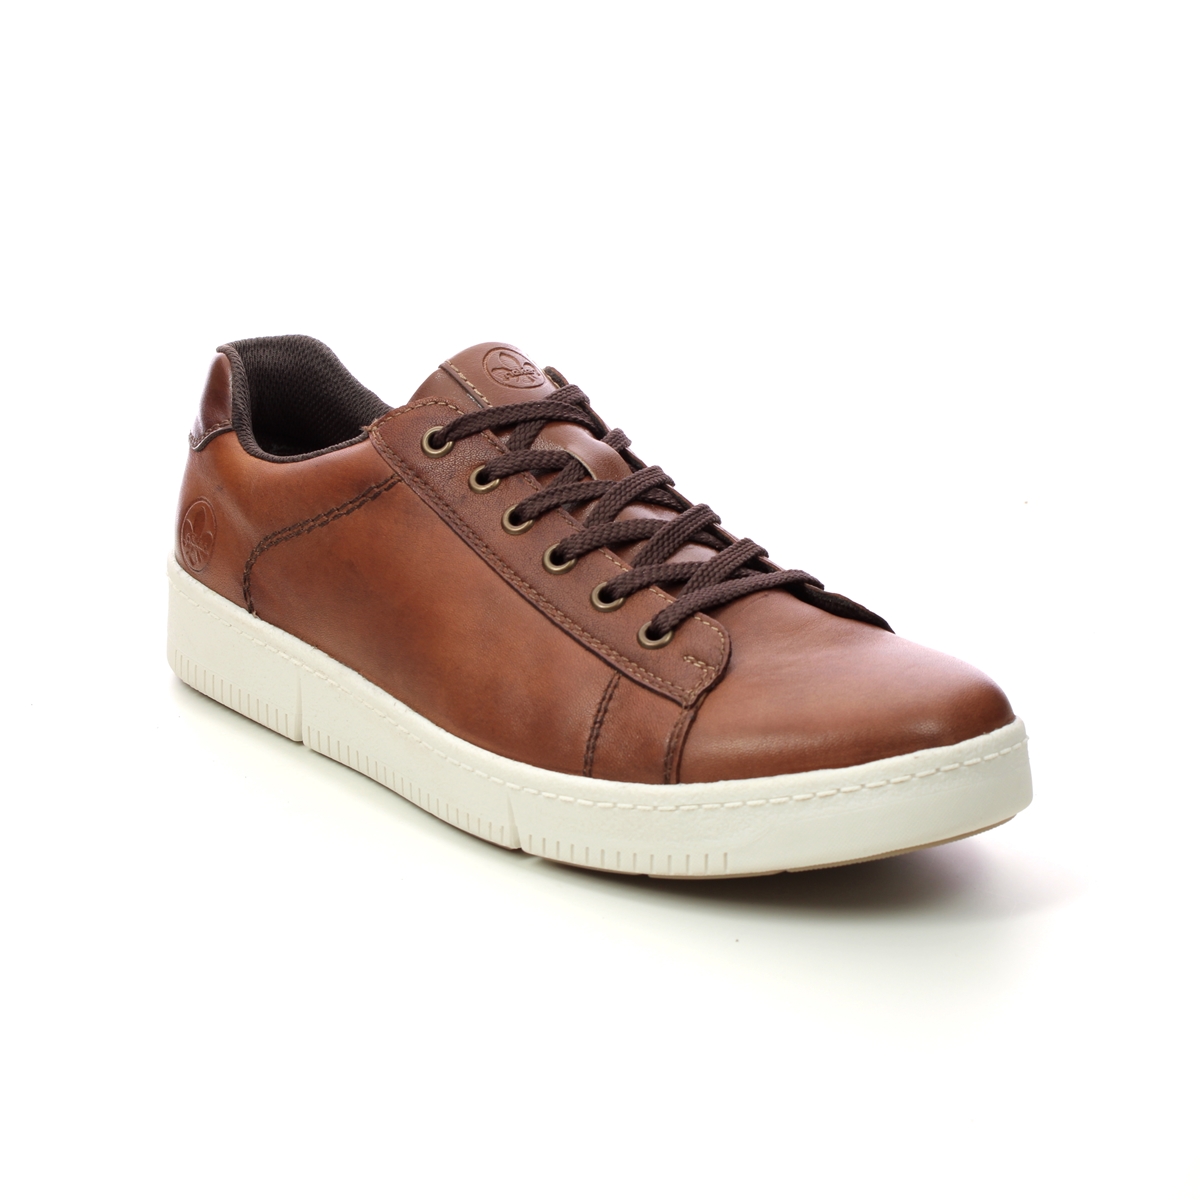 Rieker Seven Soft Tan Leather Mens Trainers B7120-24 In Size 46 In Plain Tan Leather